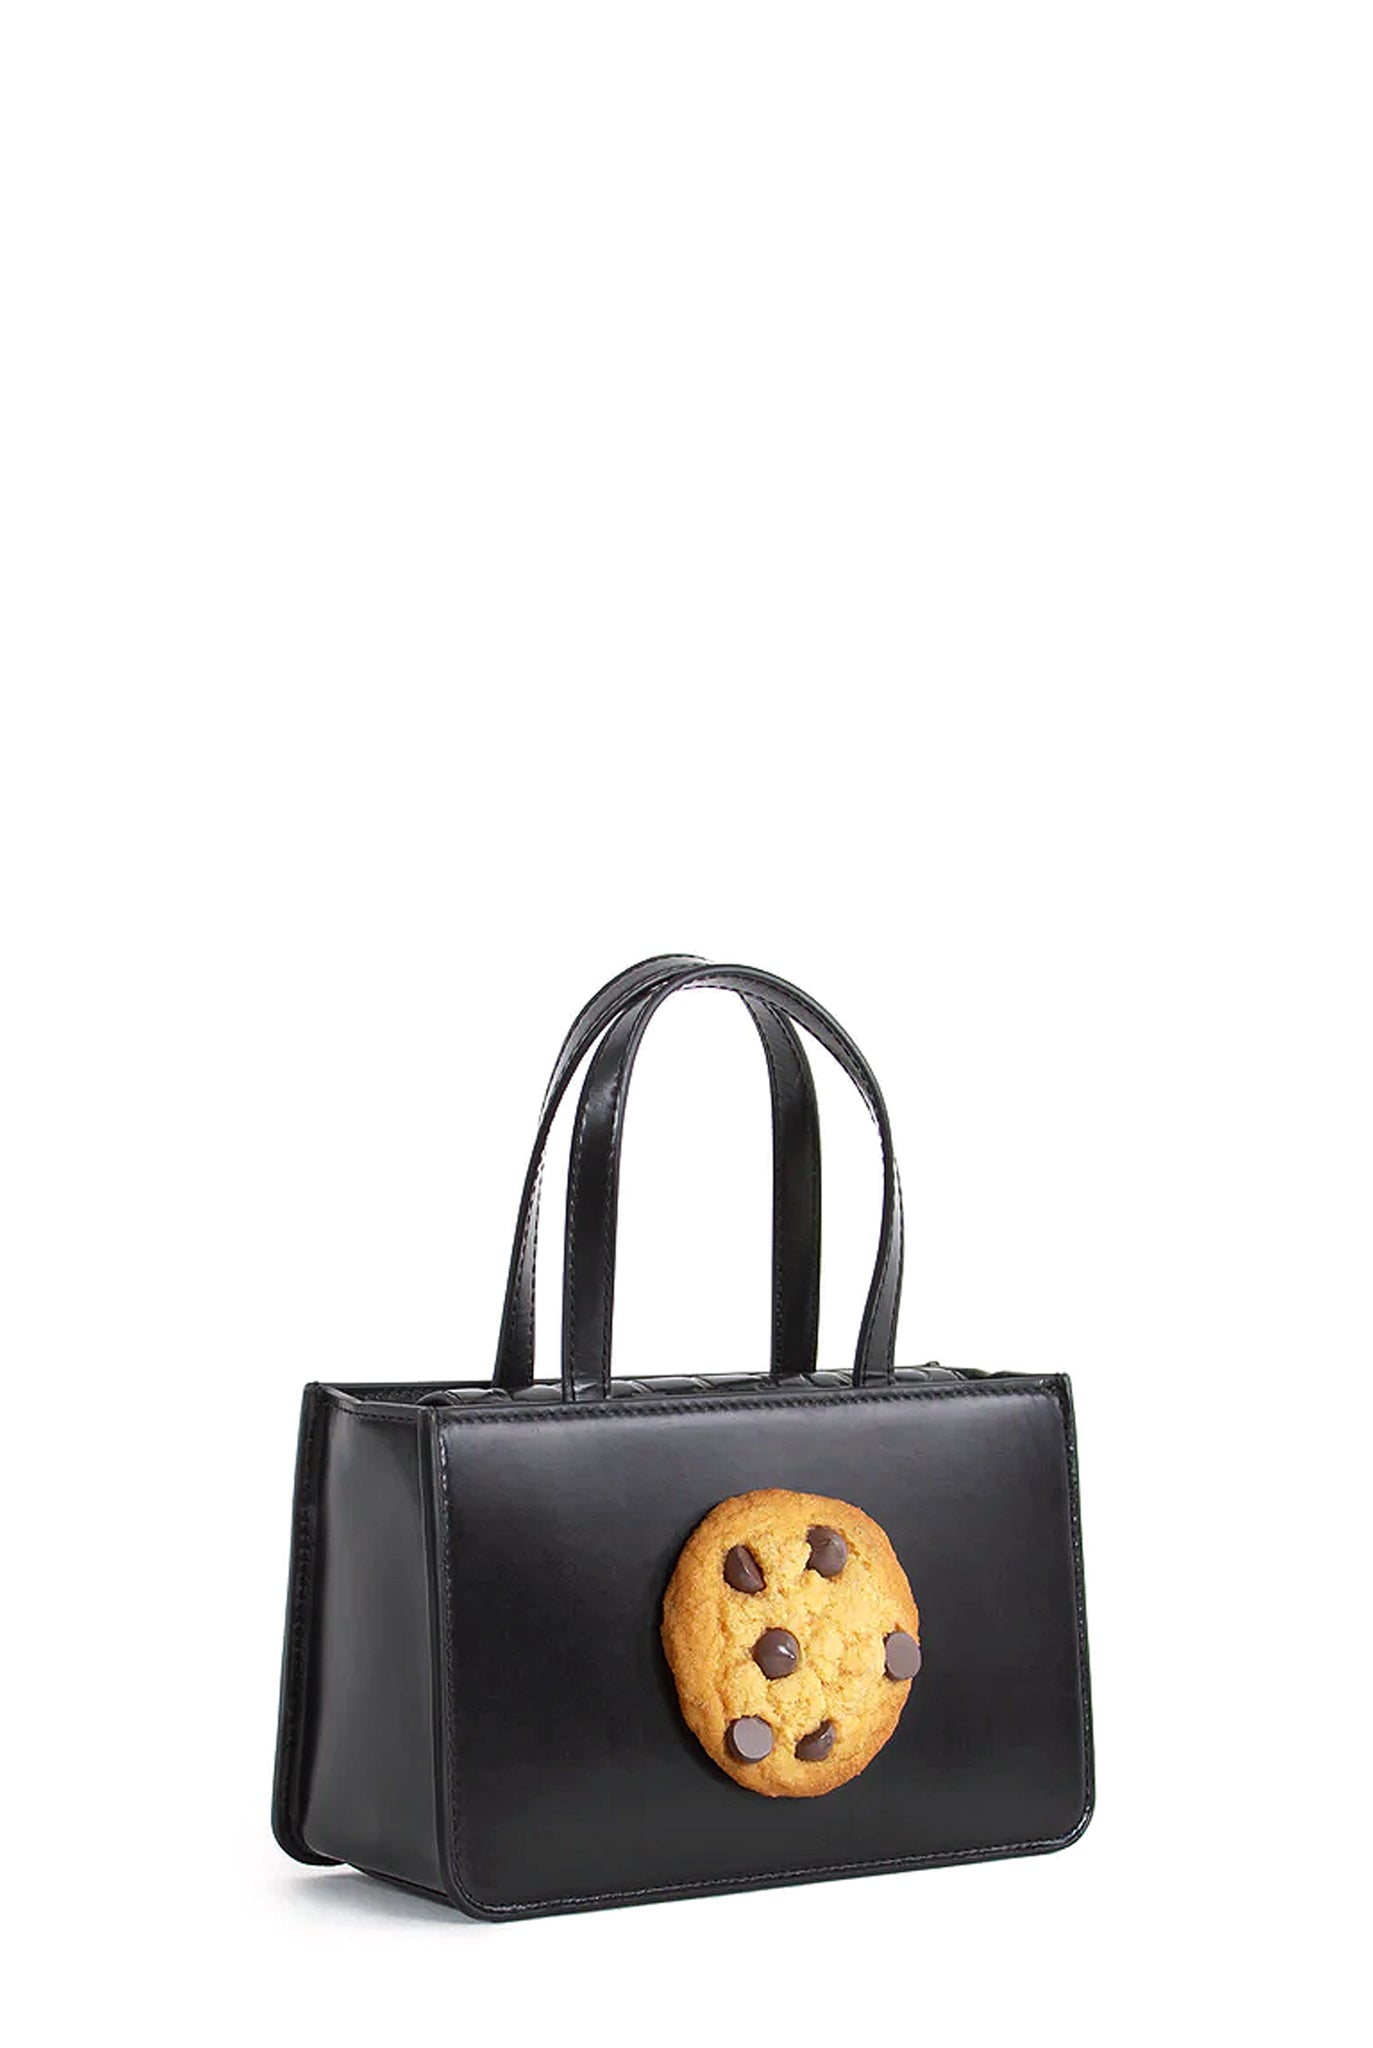 Puppets and Puppets Small Cookie Bag, Black Leather